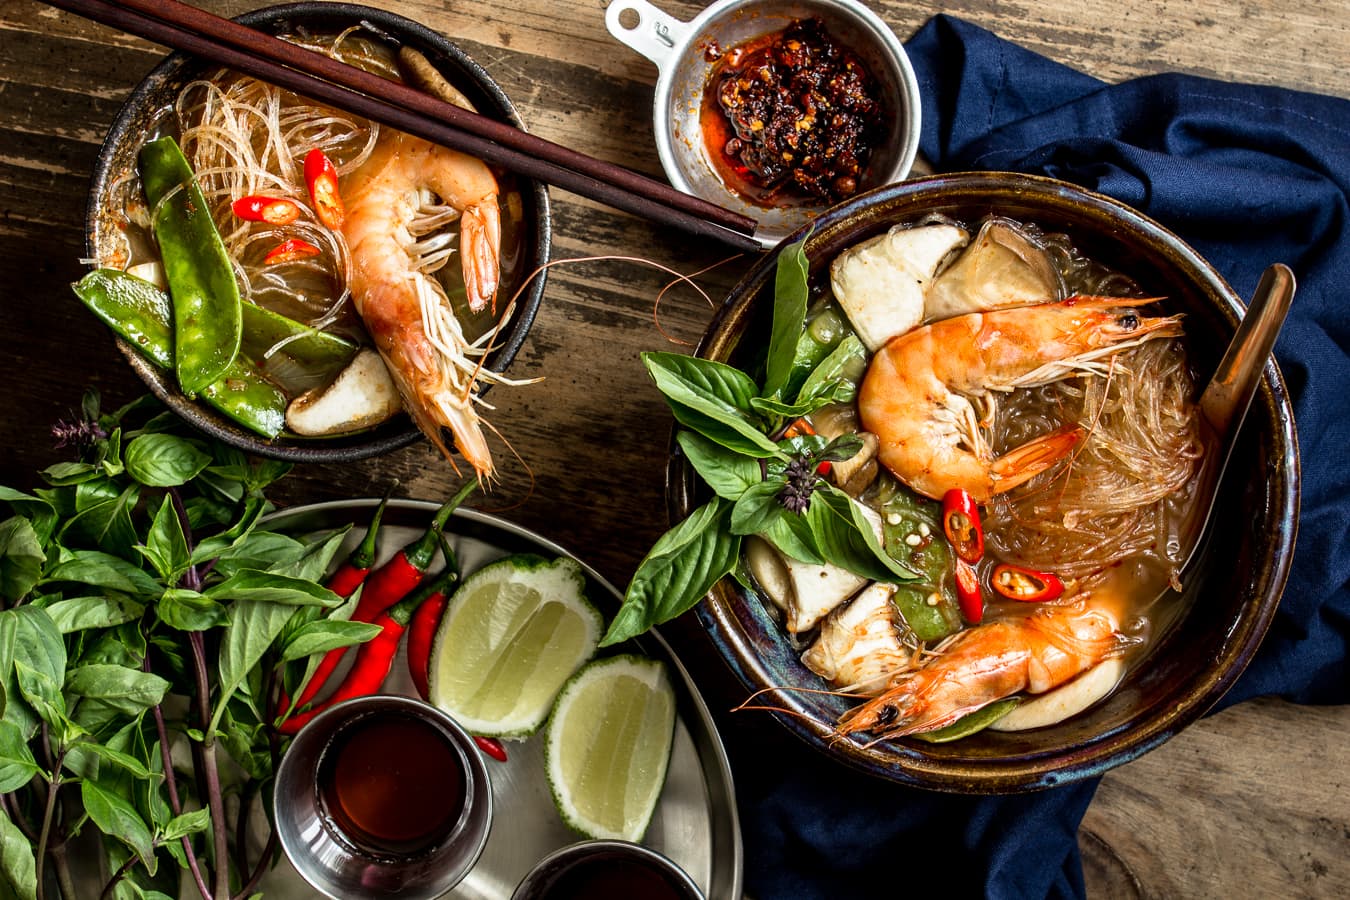 Two bowls of tom yum goong served with shrimp and glass noodles in brown bowls on a wooden table